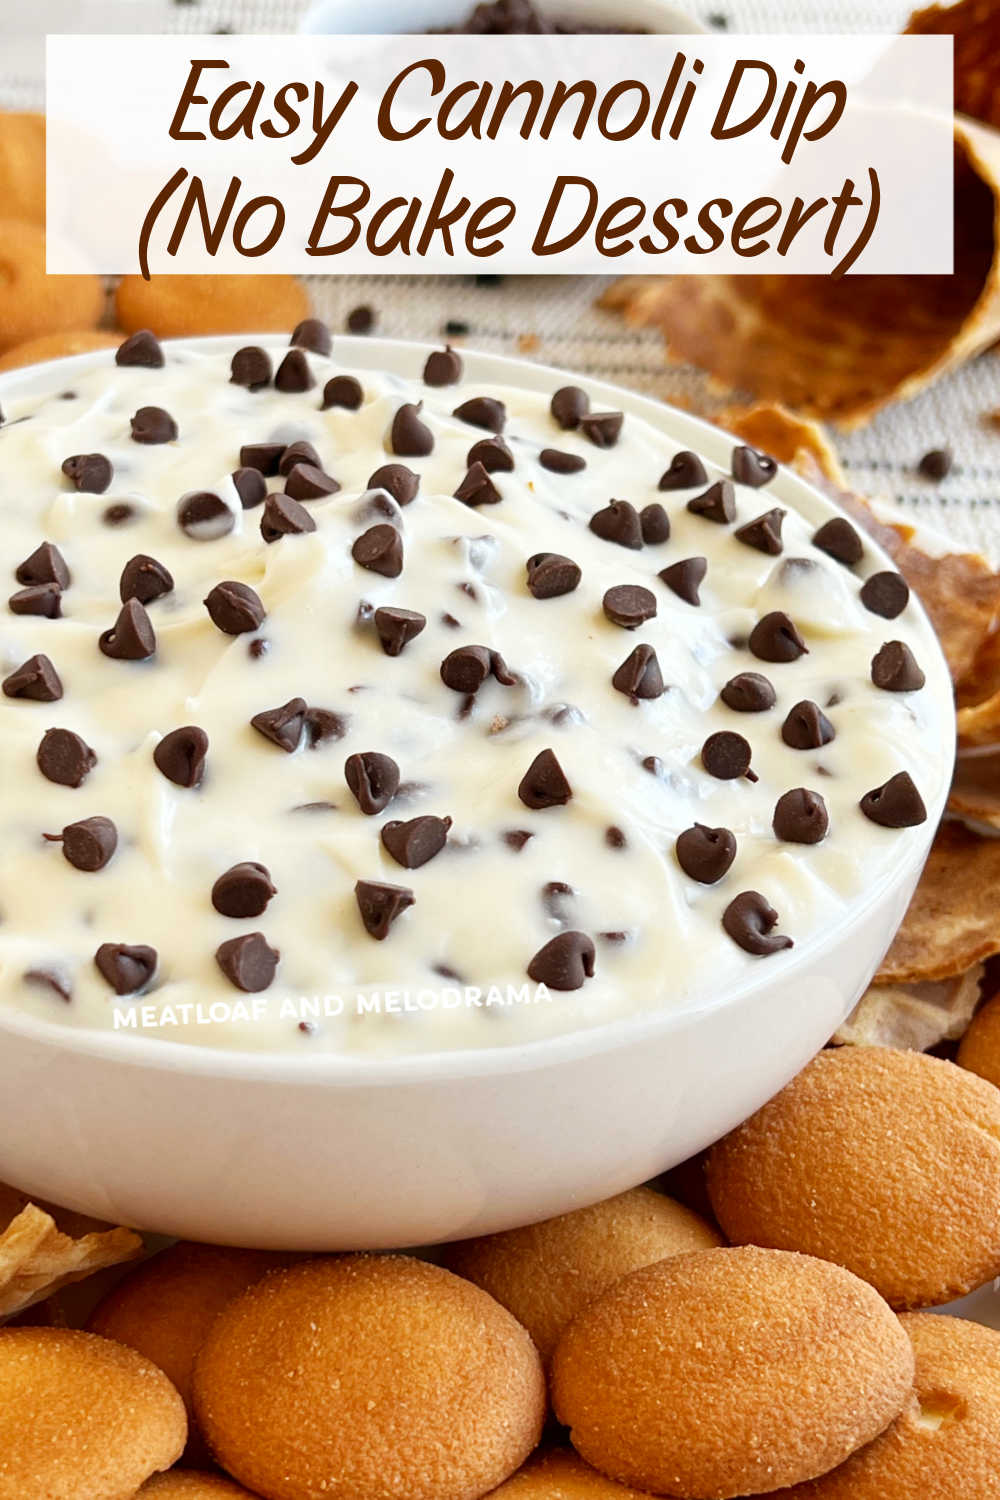 Cannoli Dip is an easy dessert dip with cream cheese, ricotta cheese and mini chocolate chips. An easy recipe for a delicious sweet dip that takes minutes to make! Just serve with your favorite dippers for an easy party treat! via @meamel